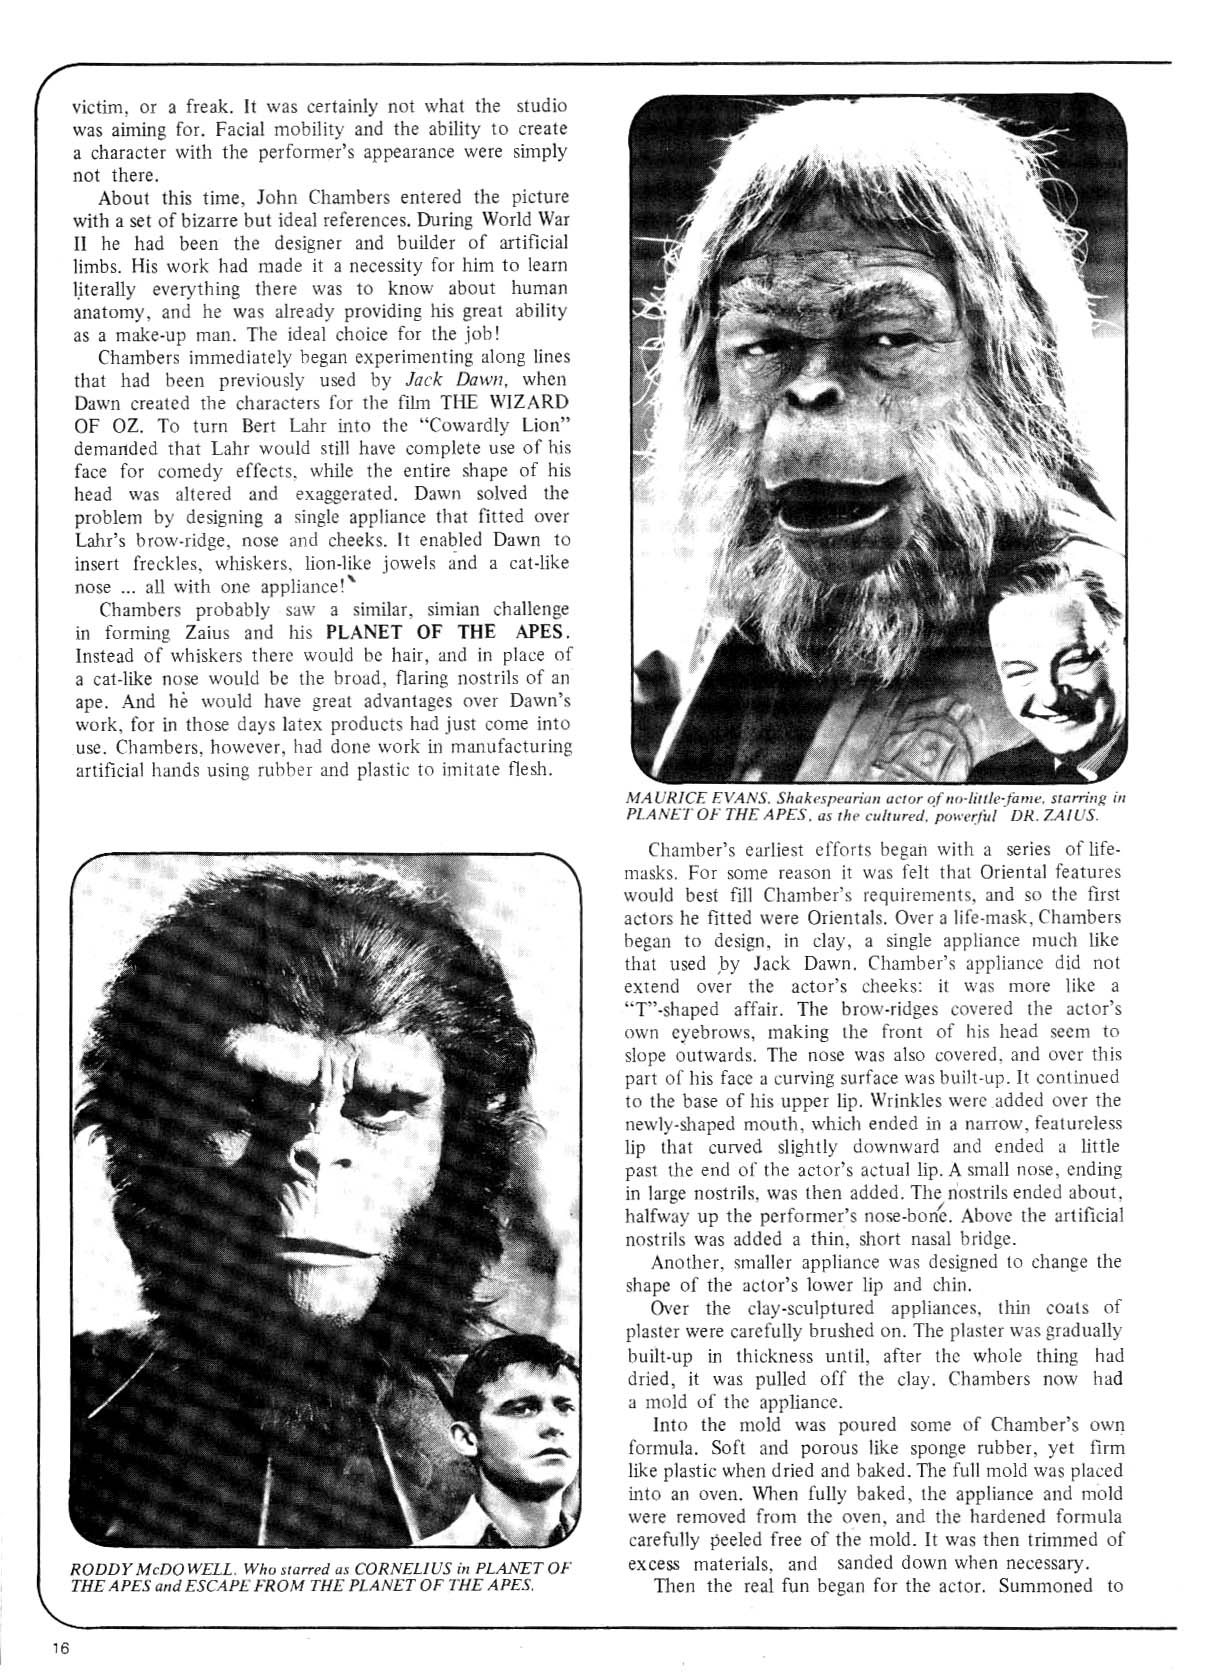 Read online Planet of the Apes (1974) comic -  Issue #1 - 16